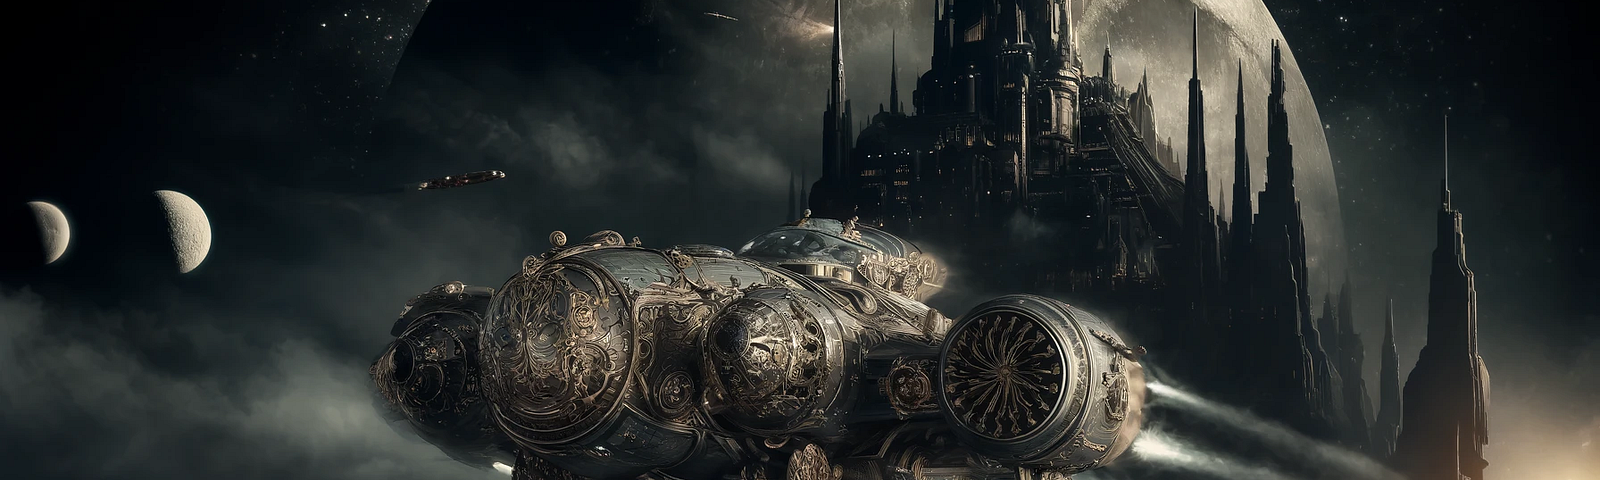 A steampunk style hovercraft silently gliding through the dark void of space, approaching a foreboding lunar base.